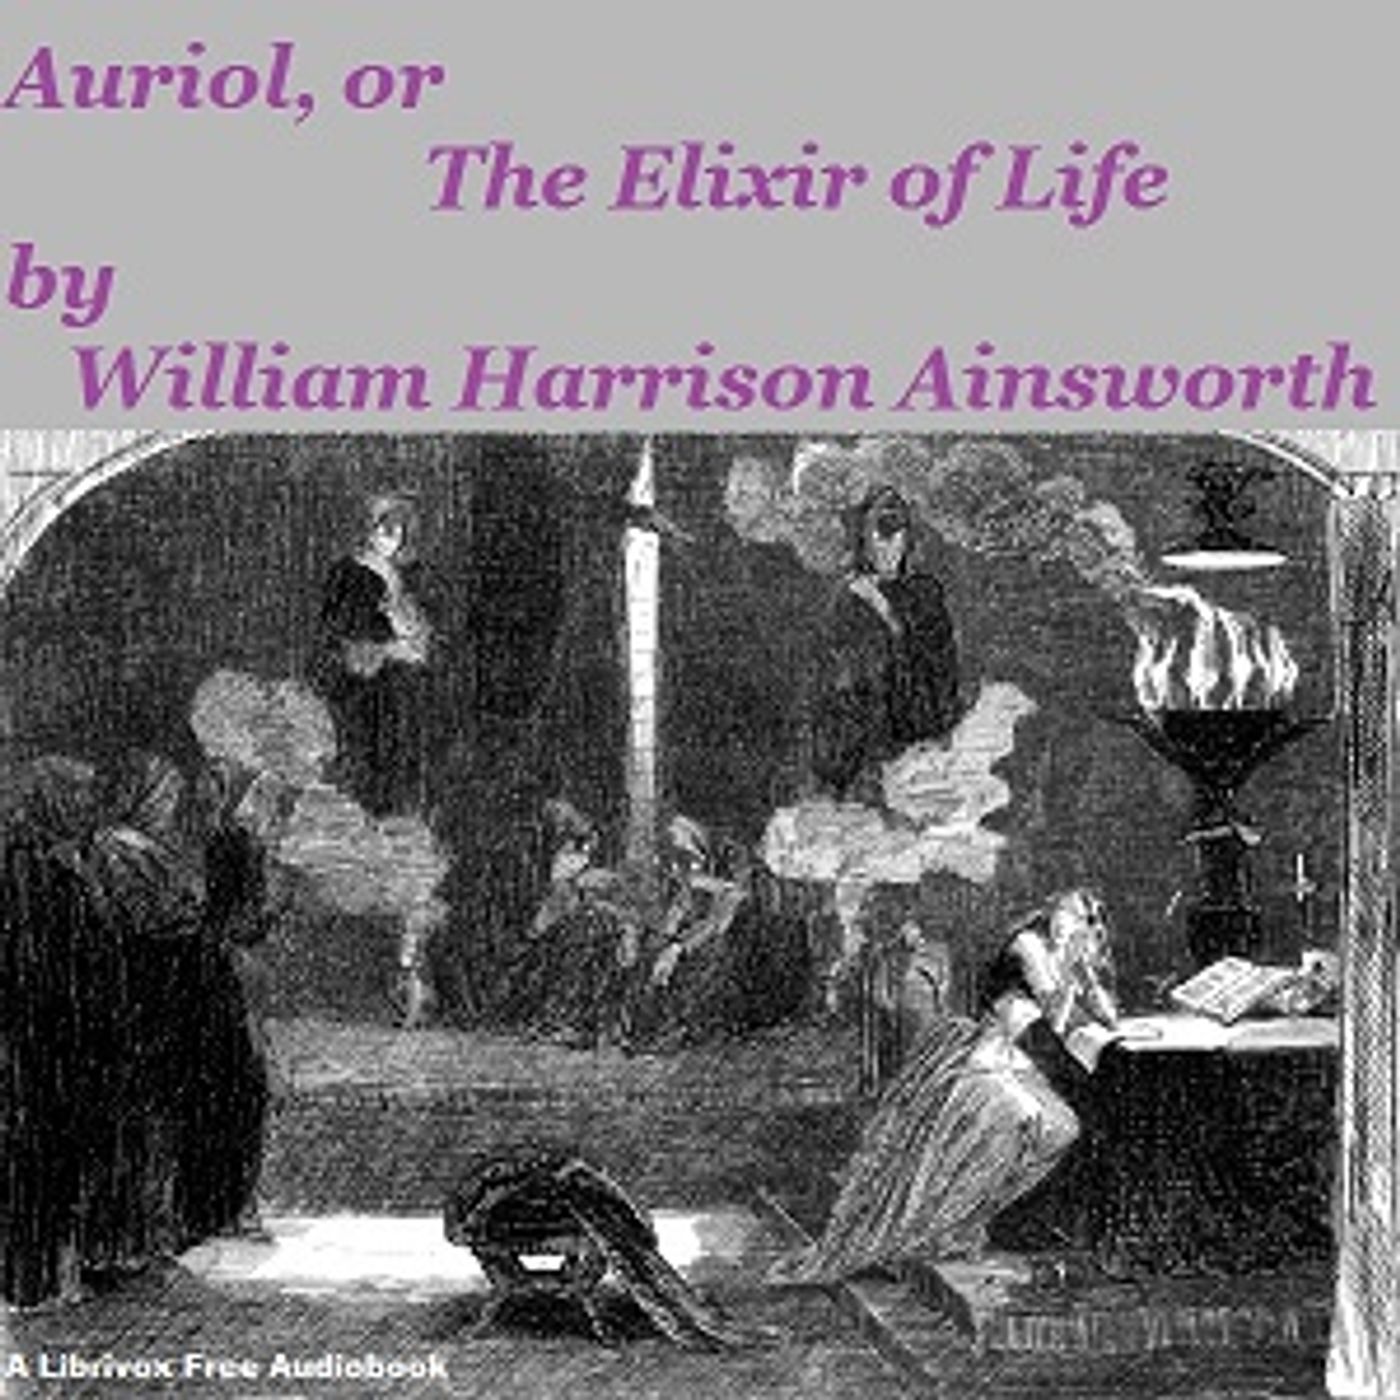 Auriol, or The Elixir of Life by William Harrison Ainsworth (1805 – 1882)